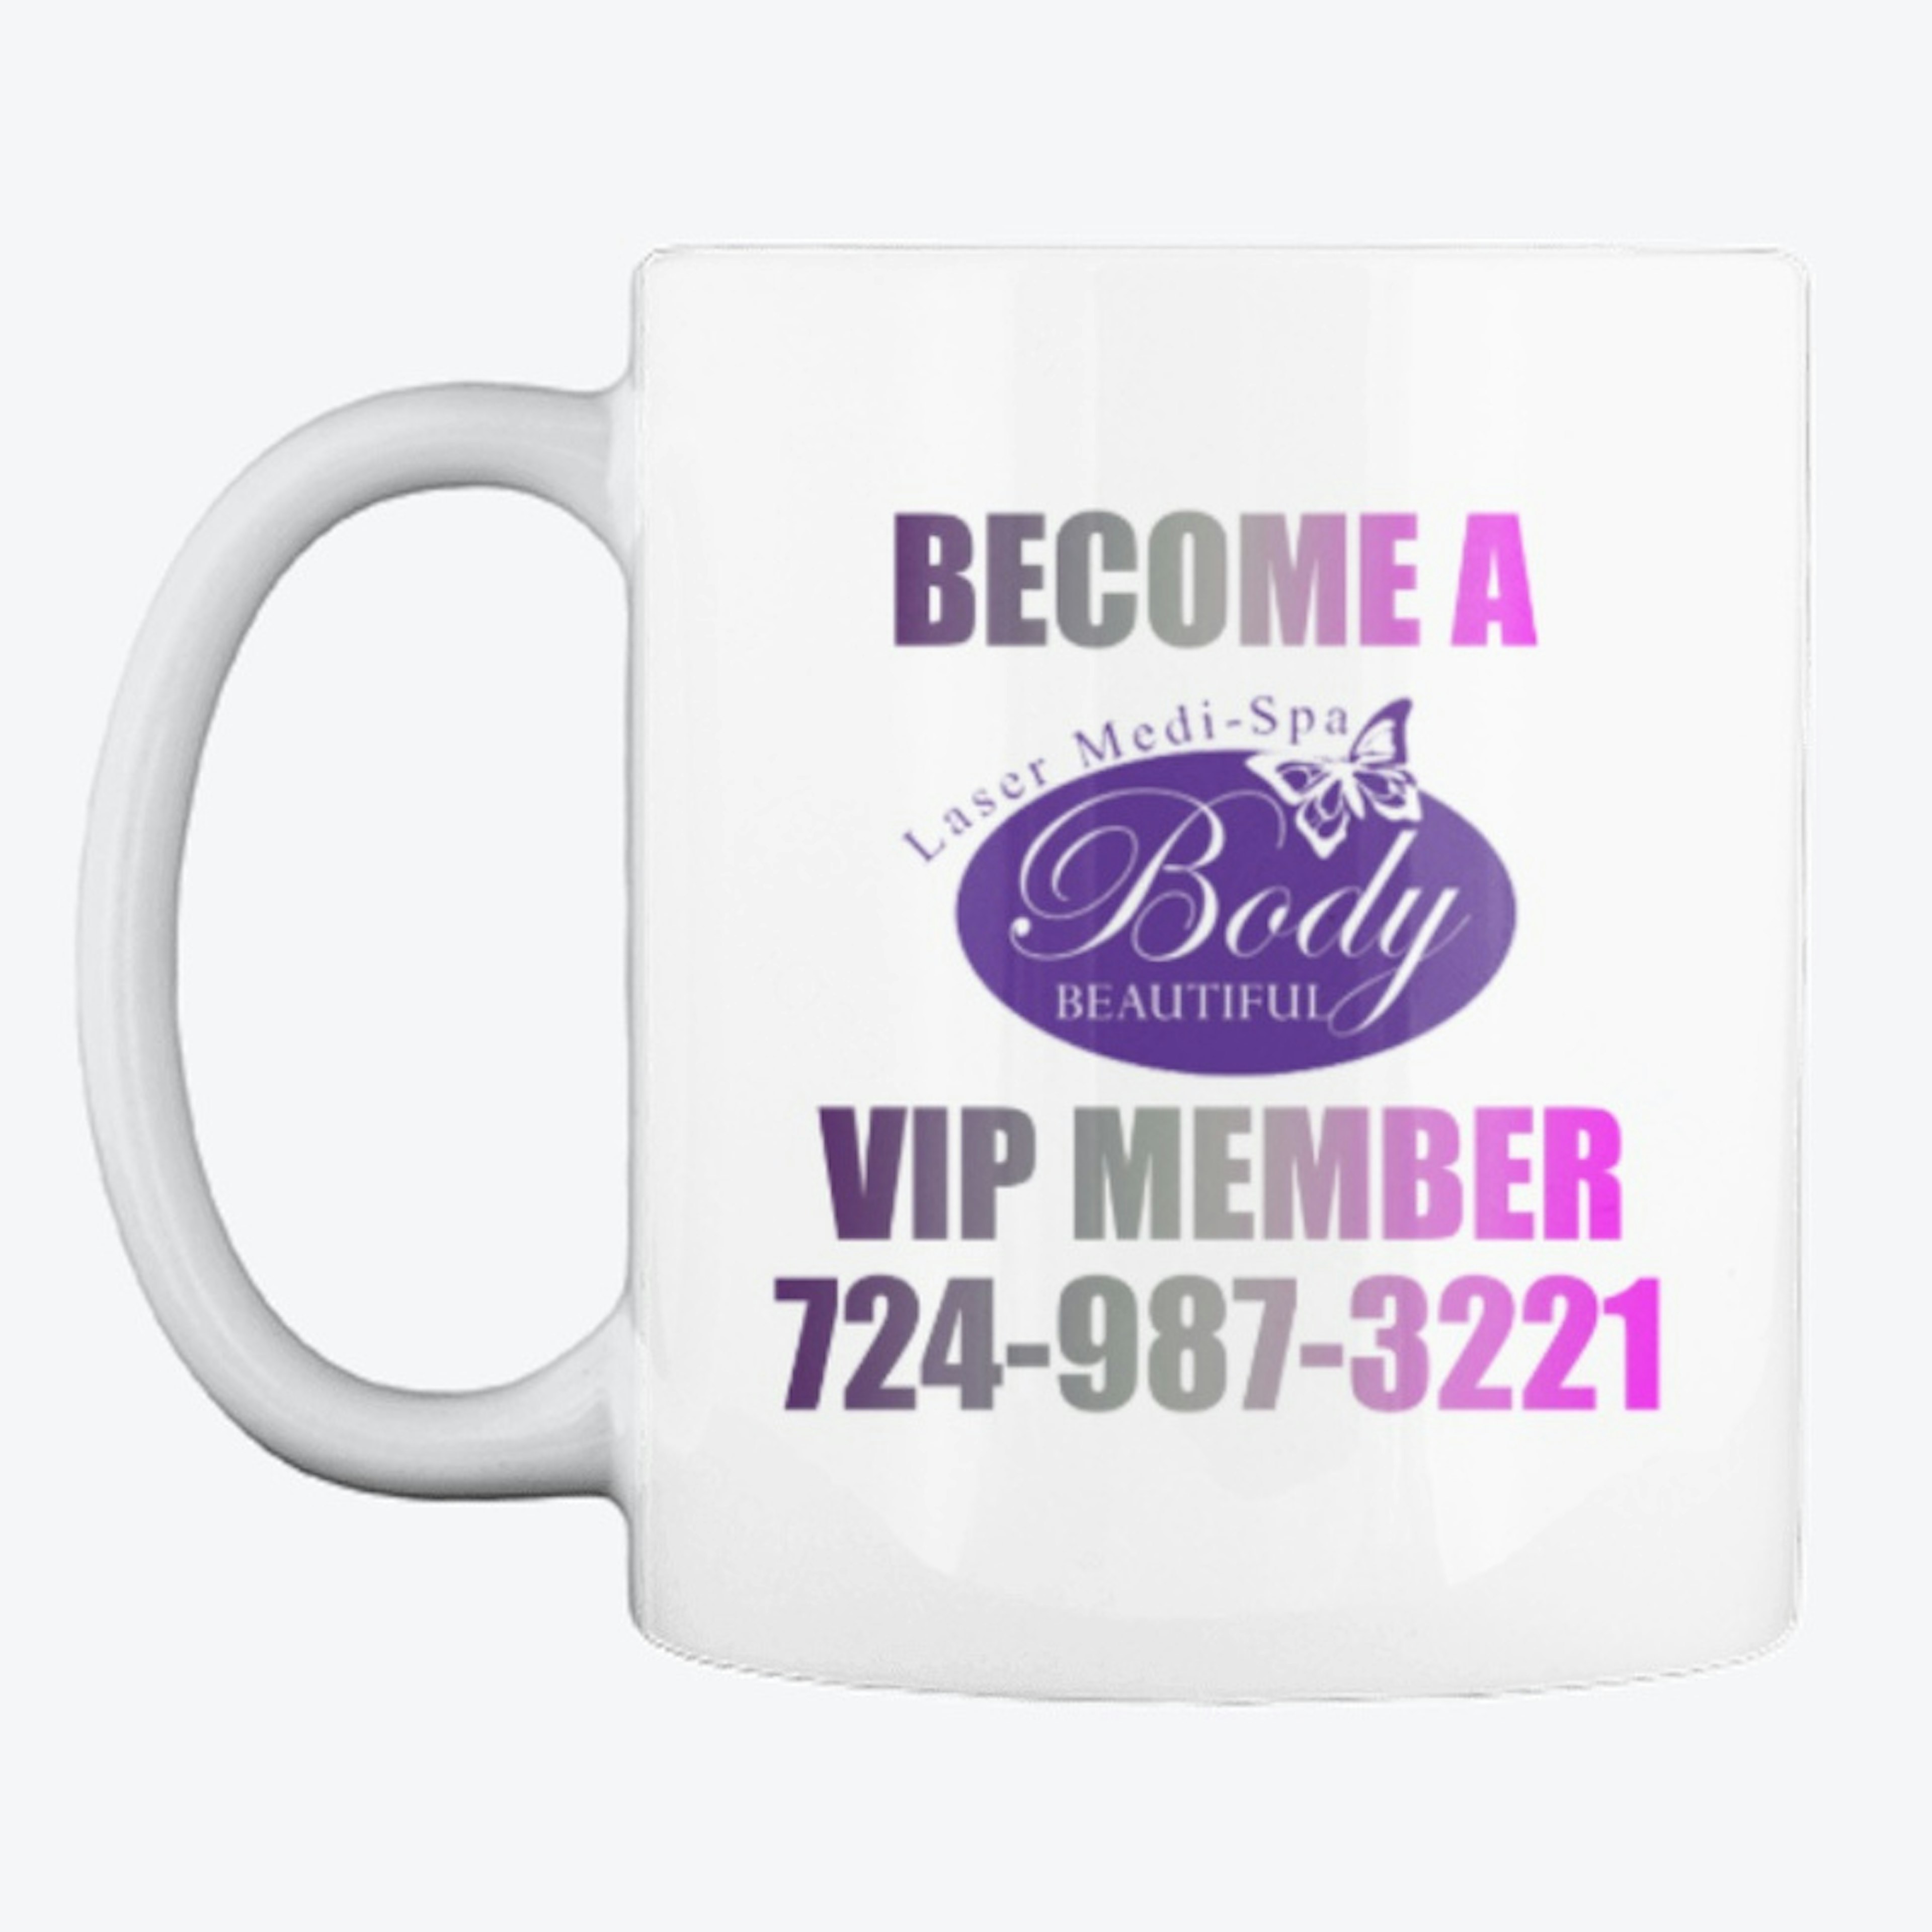 Become a VIP Member